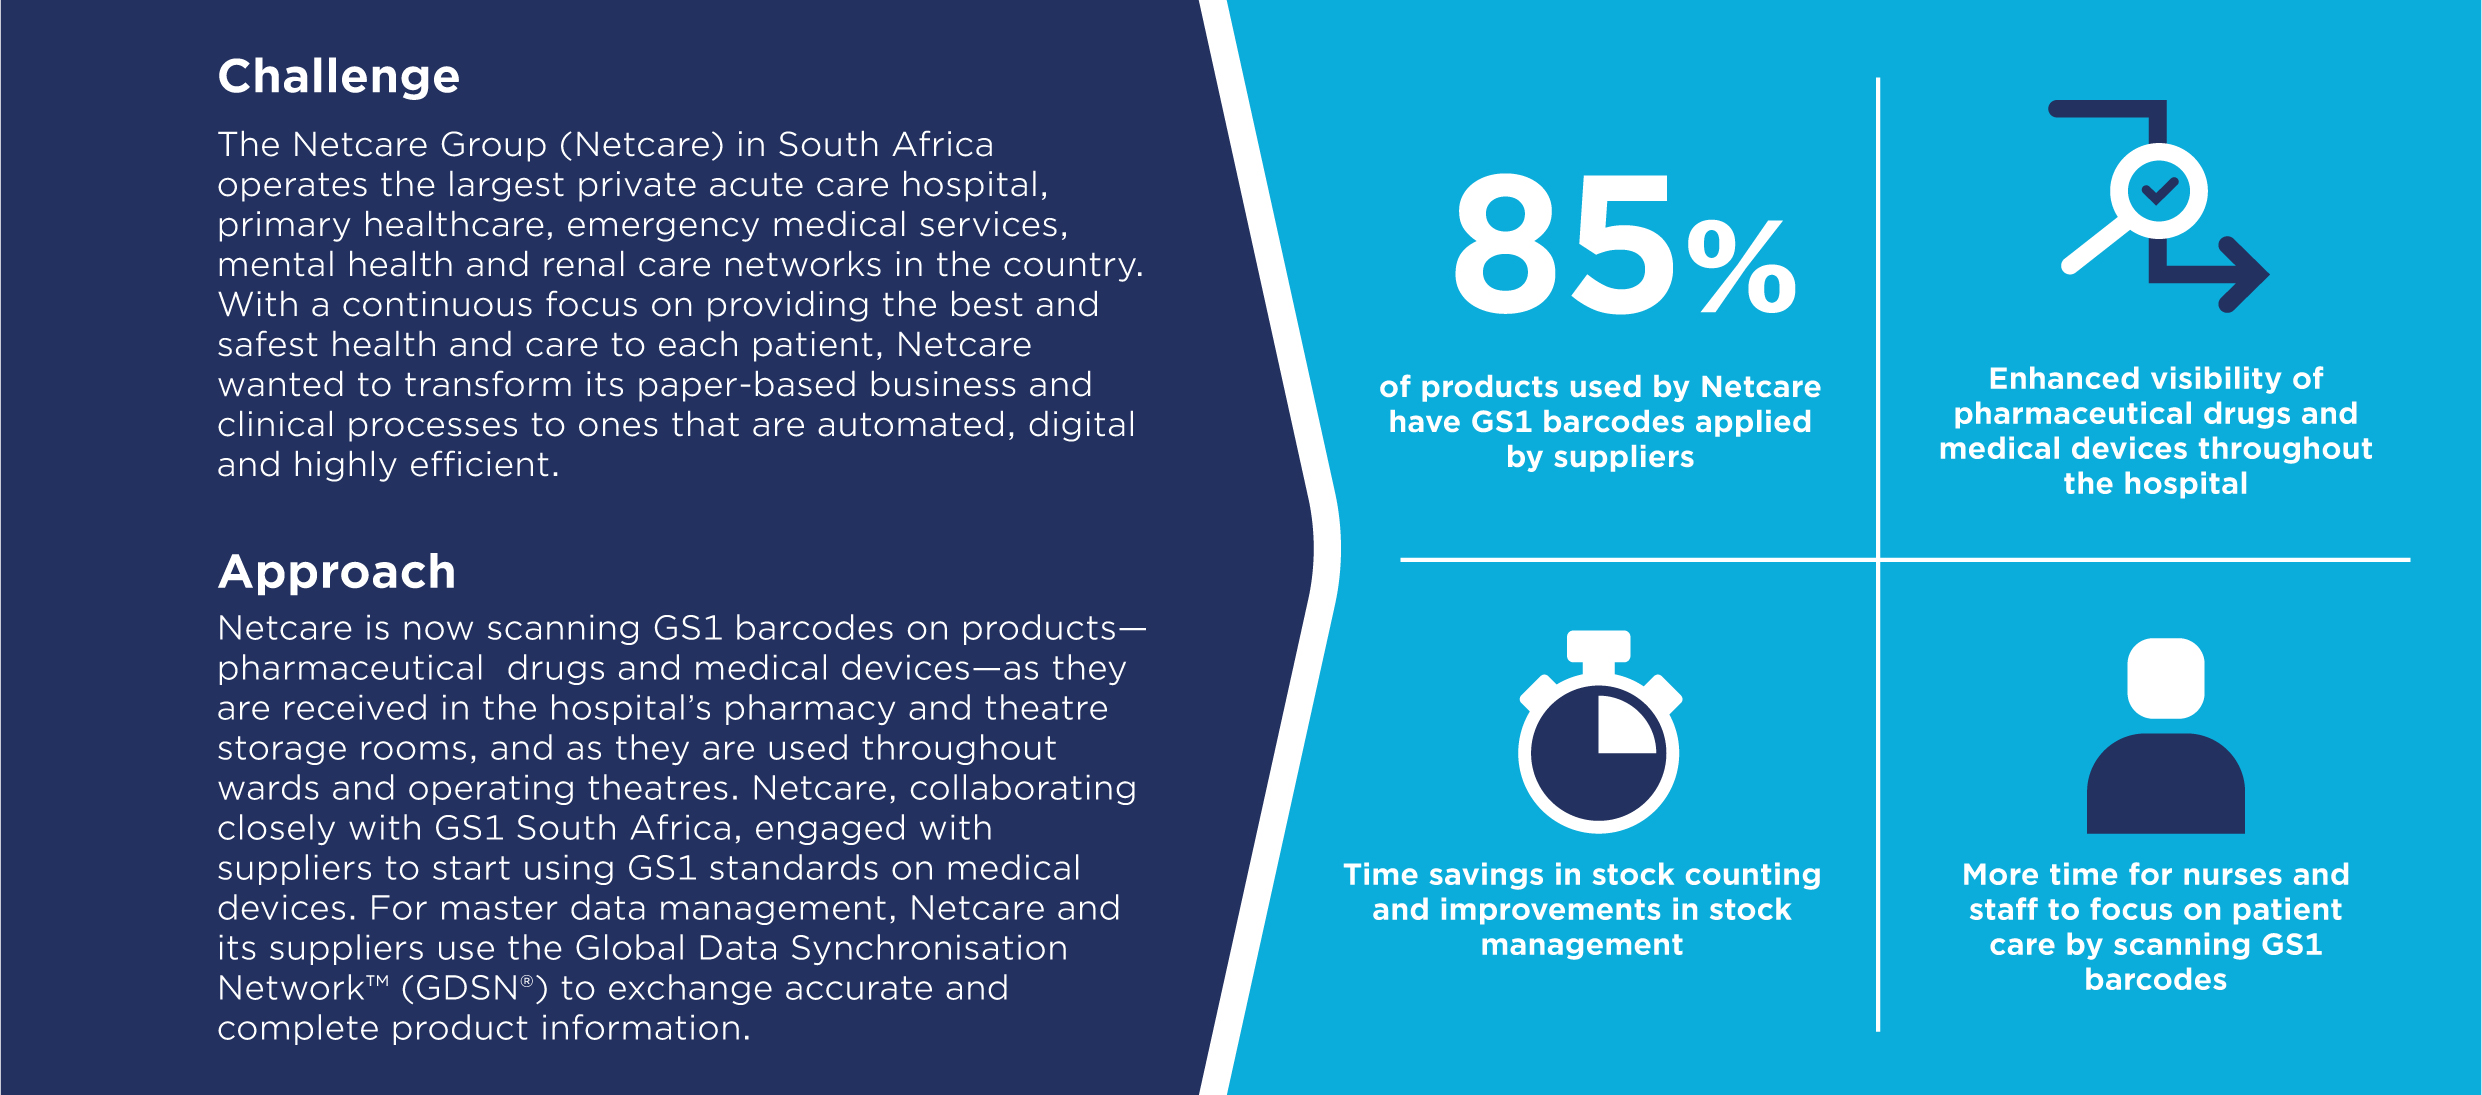 Netcare: Investing in GS1 standards and quality product information for patient safety